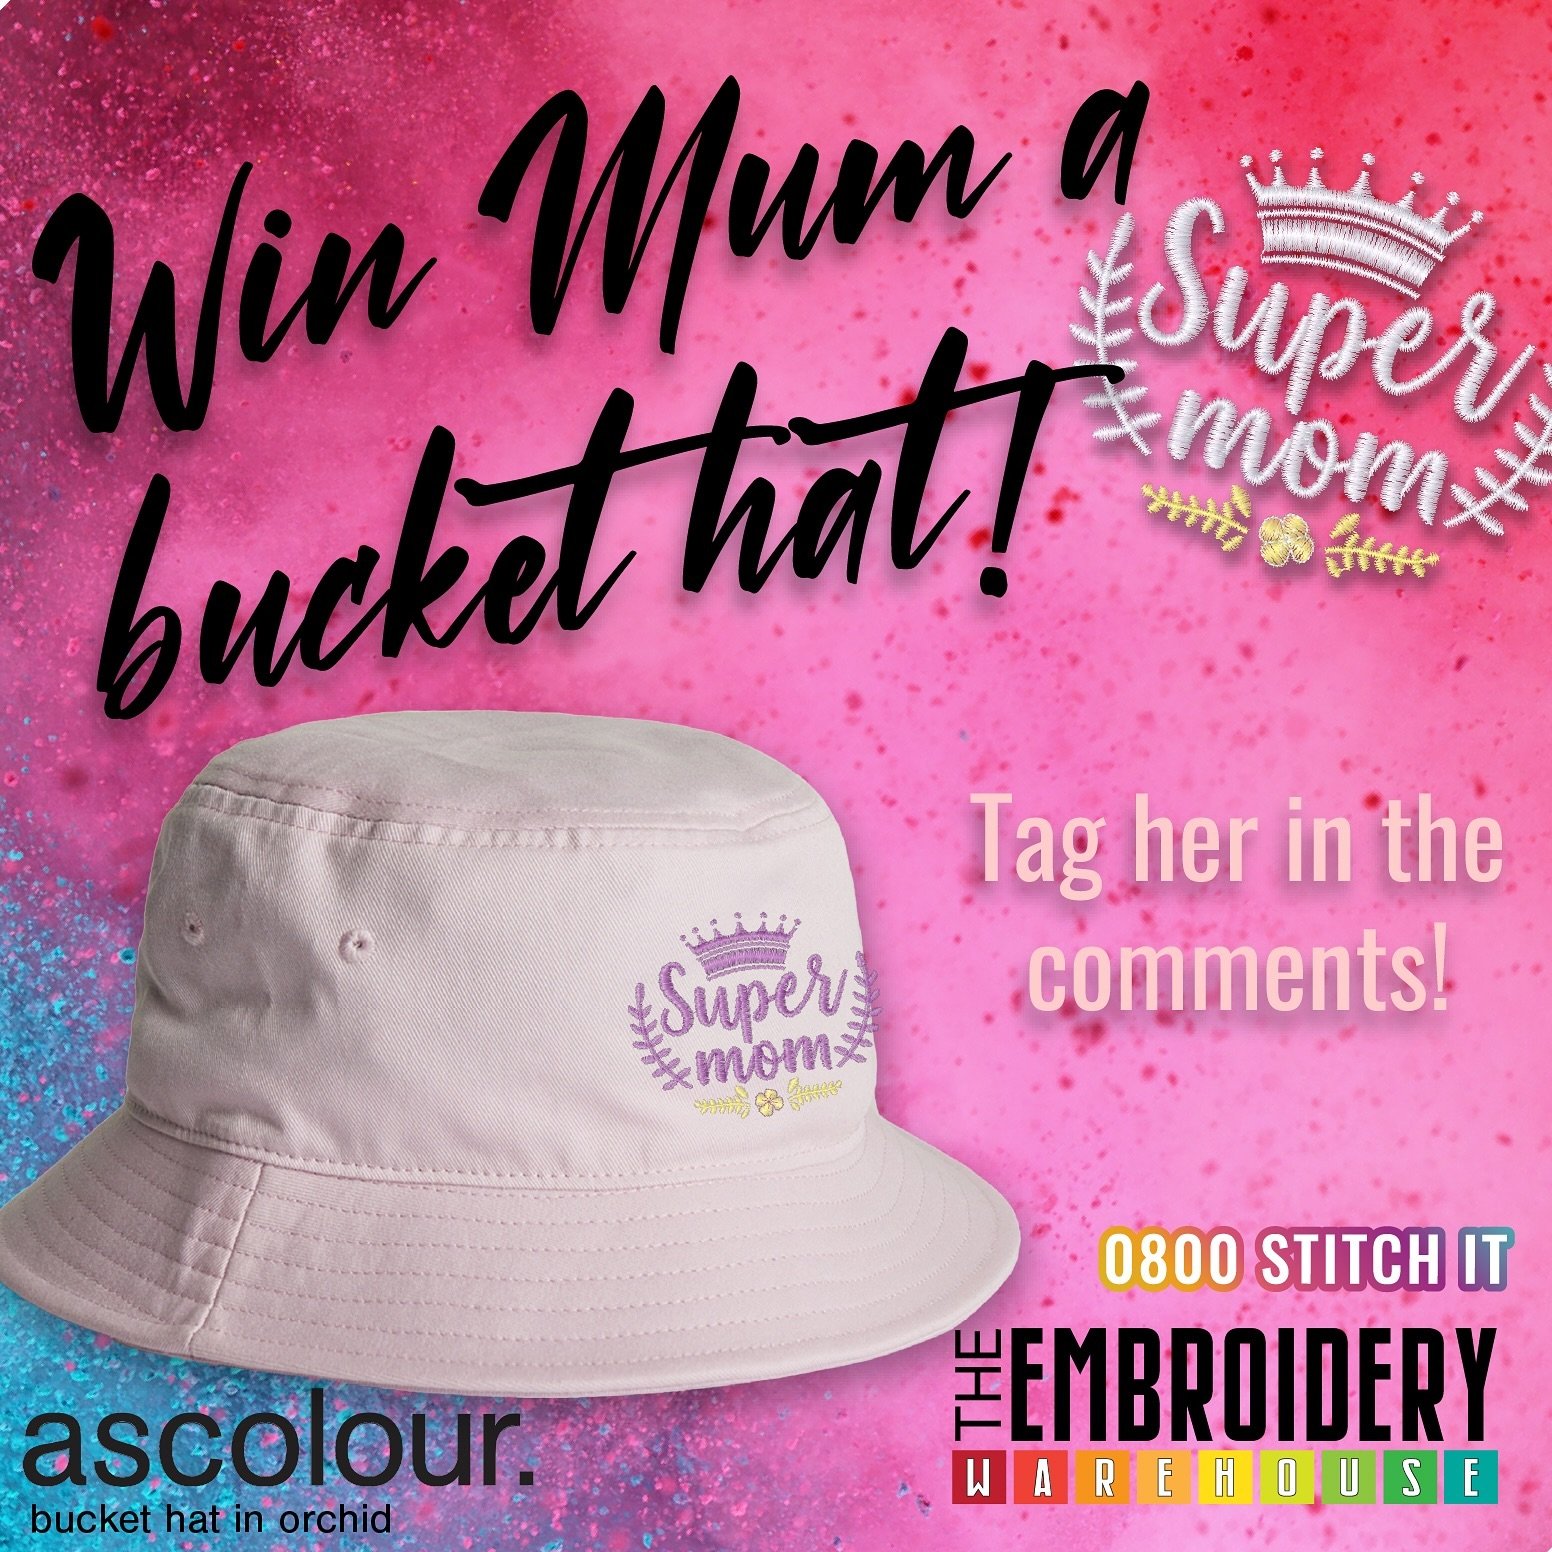 It&rsquo;s the hardest job there is, but someone&rsquo;s got to do it! Give her credit and a free hat! Tag up your #supermum  #superstepmum #superpsudeomum #supermumofyourkids #superfostermum #supergranmum (etc etc).. and we&rsquo;ll draw one tag to 